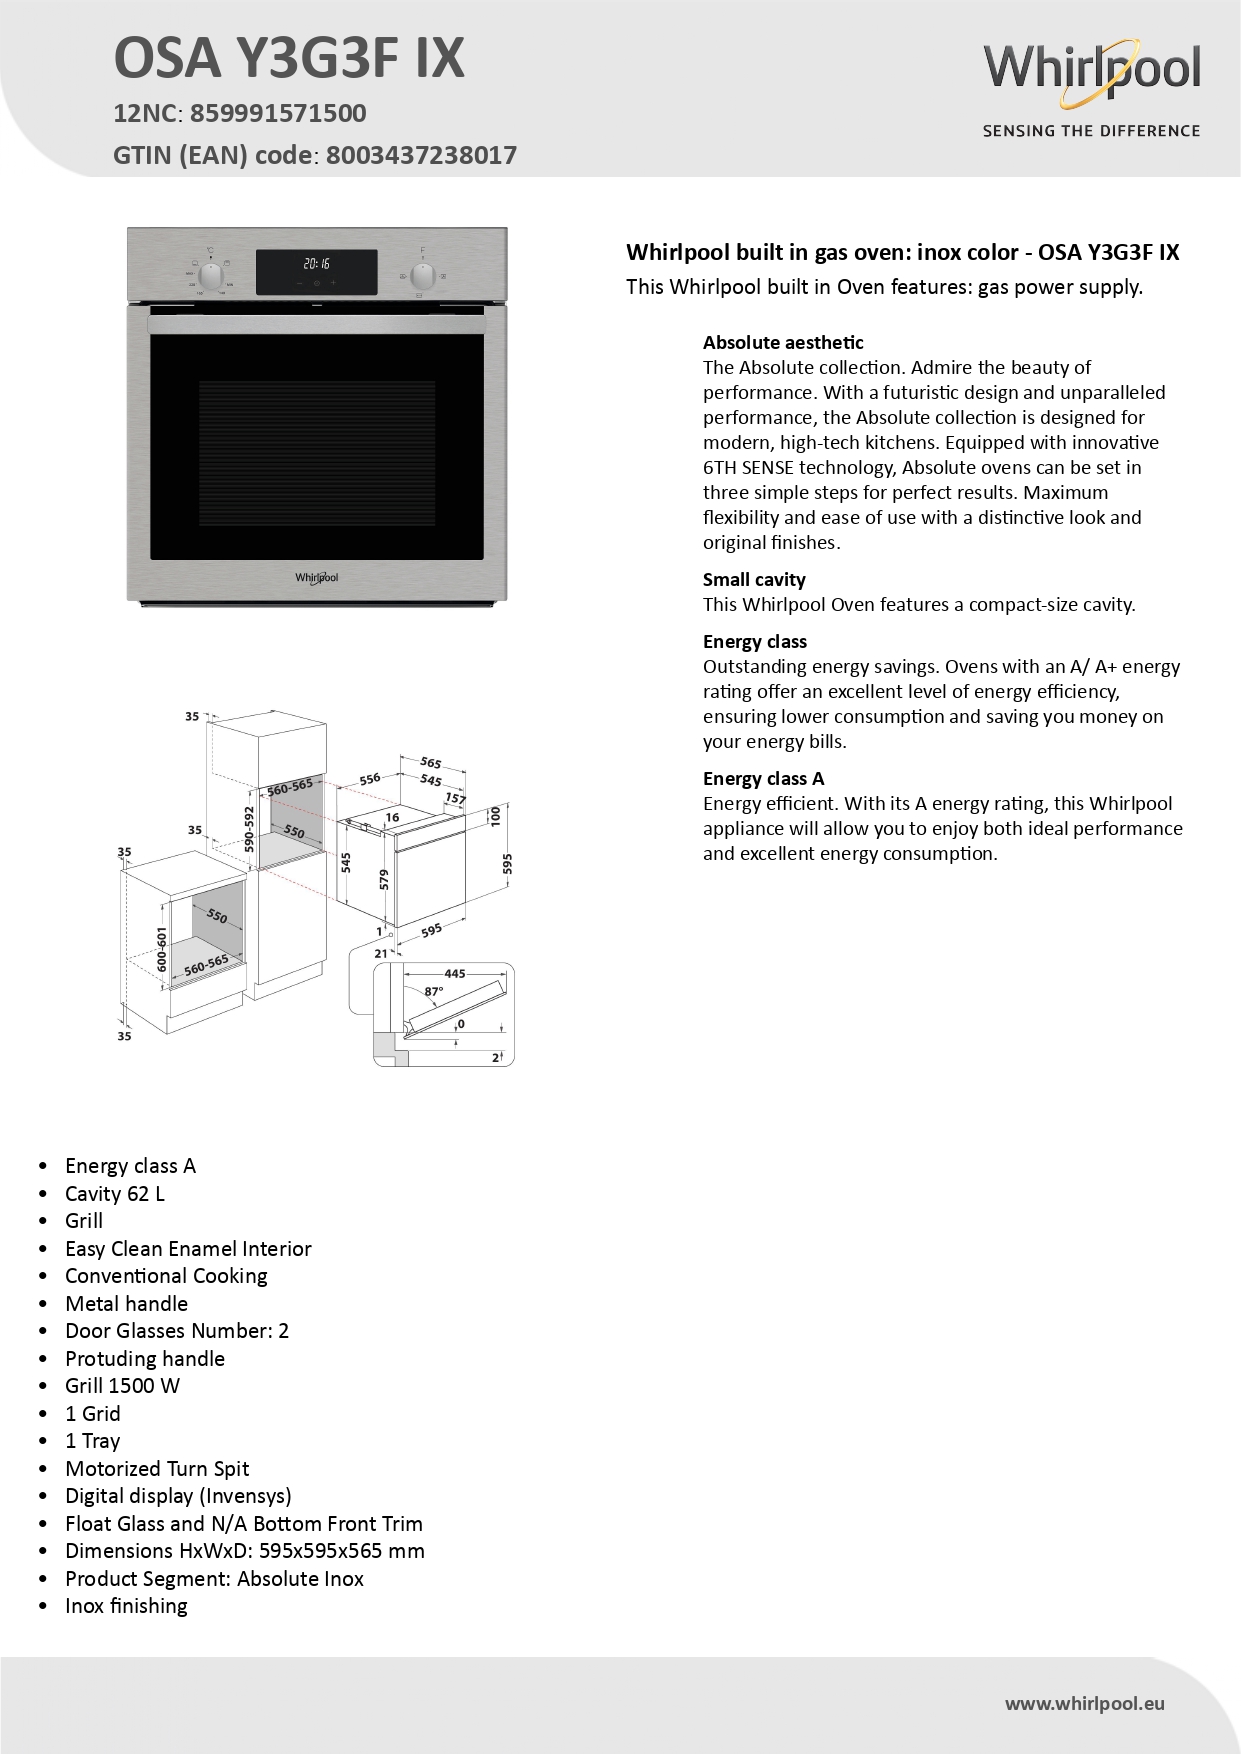 Whirlpool OSA Y3G3F IX | Built-in Gas Oven